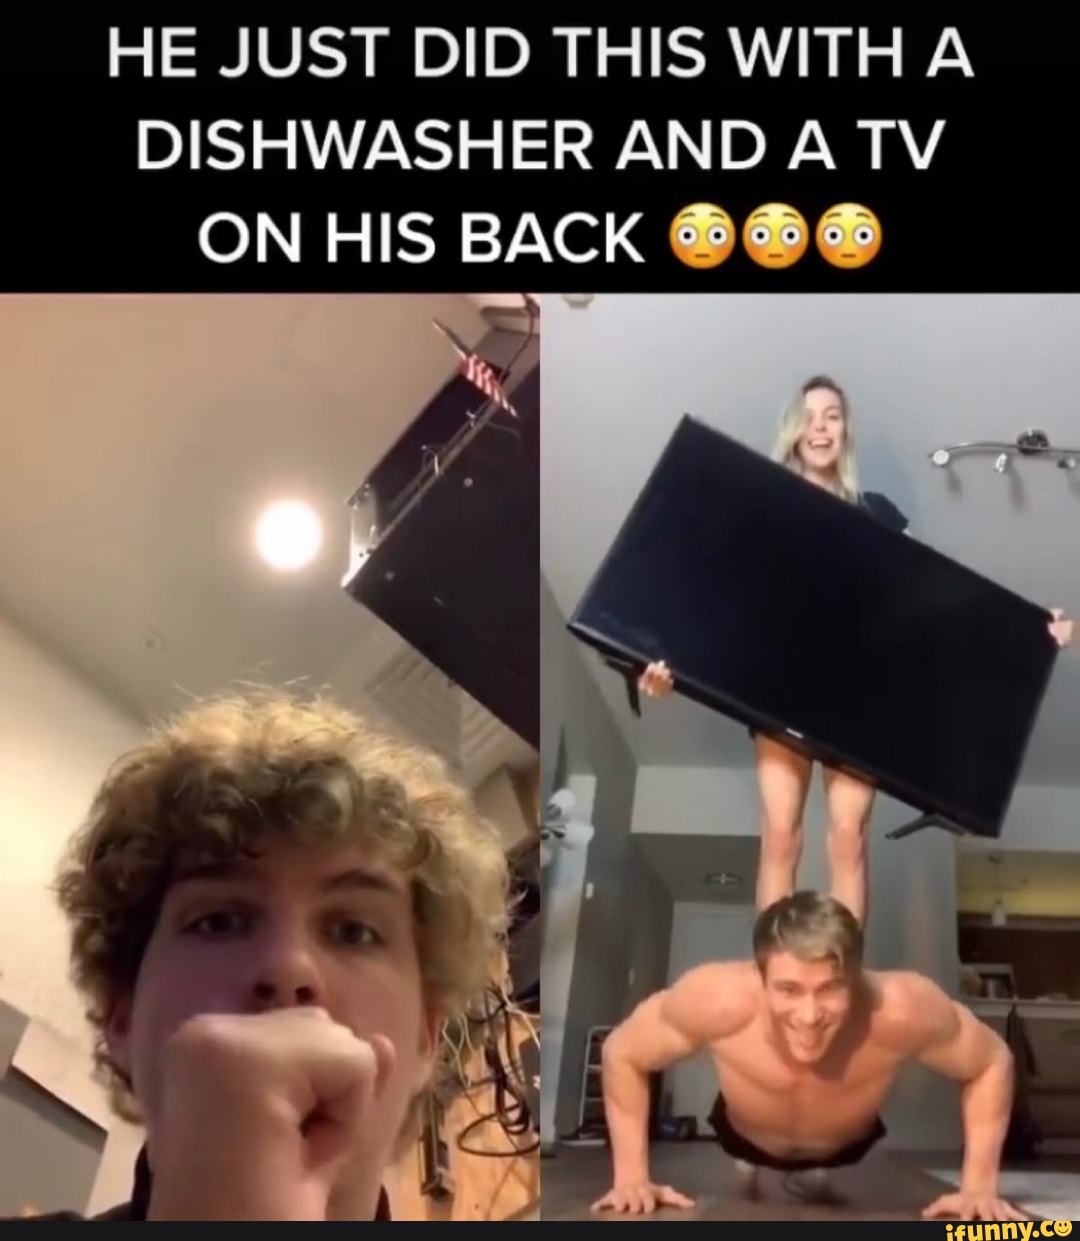 Look at the size of my new tv compared to my dishwasher - iFunny